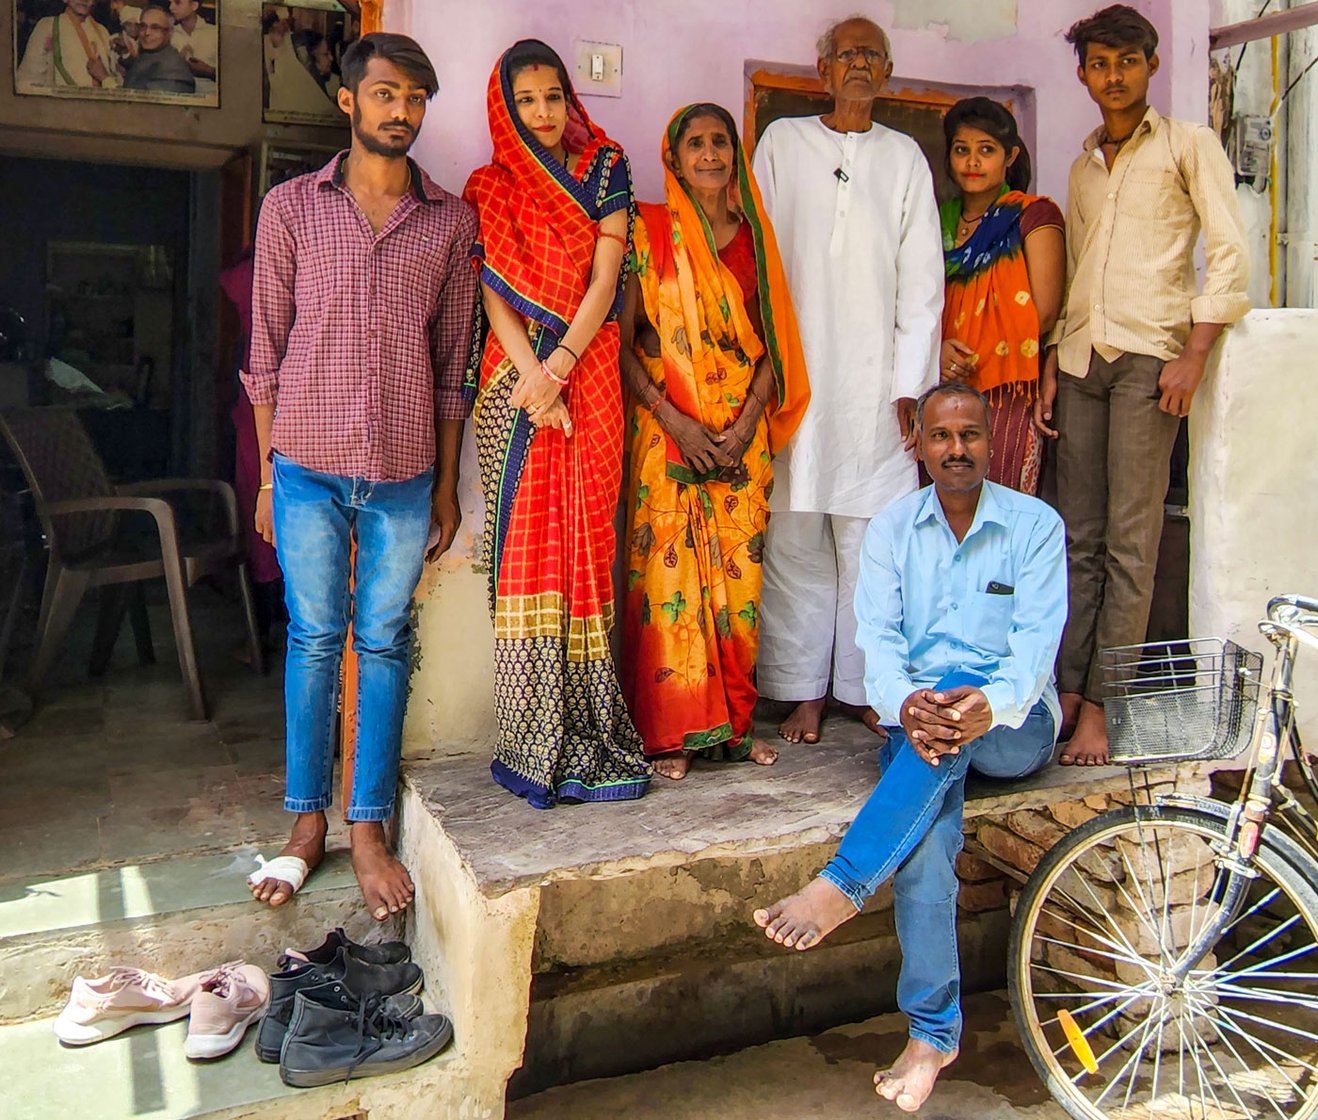 Shobharam with his family outside their home in Ajmer. In his nineties, the over six feet tall gentleman still stands ramrod straight